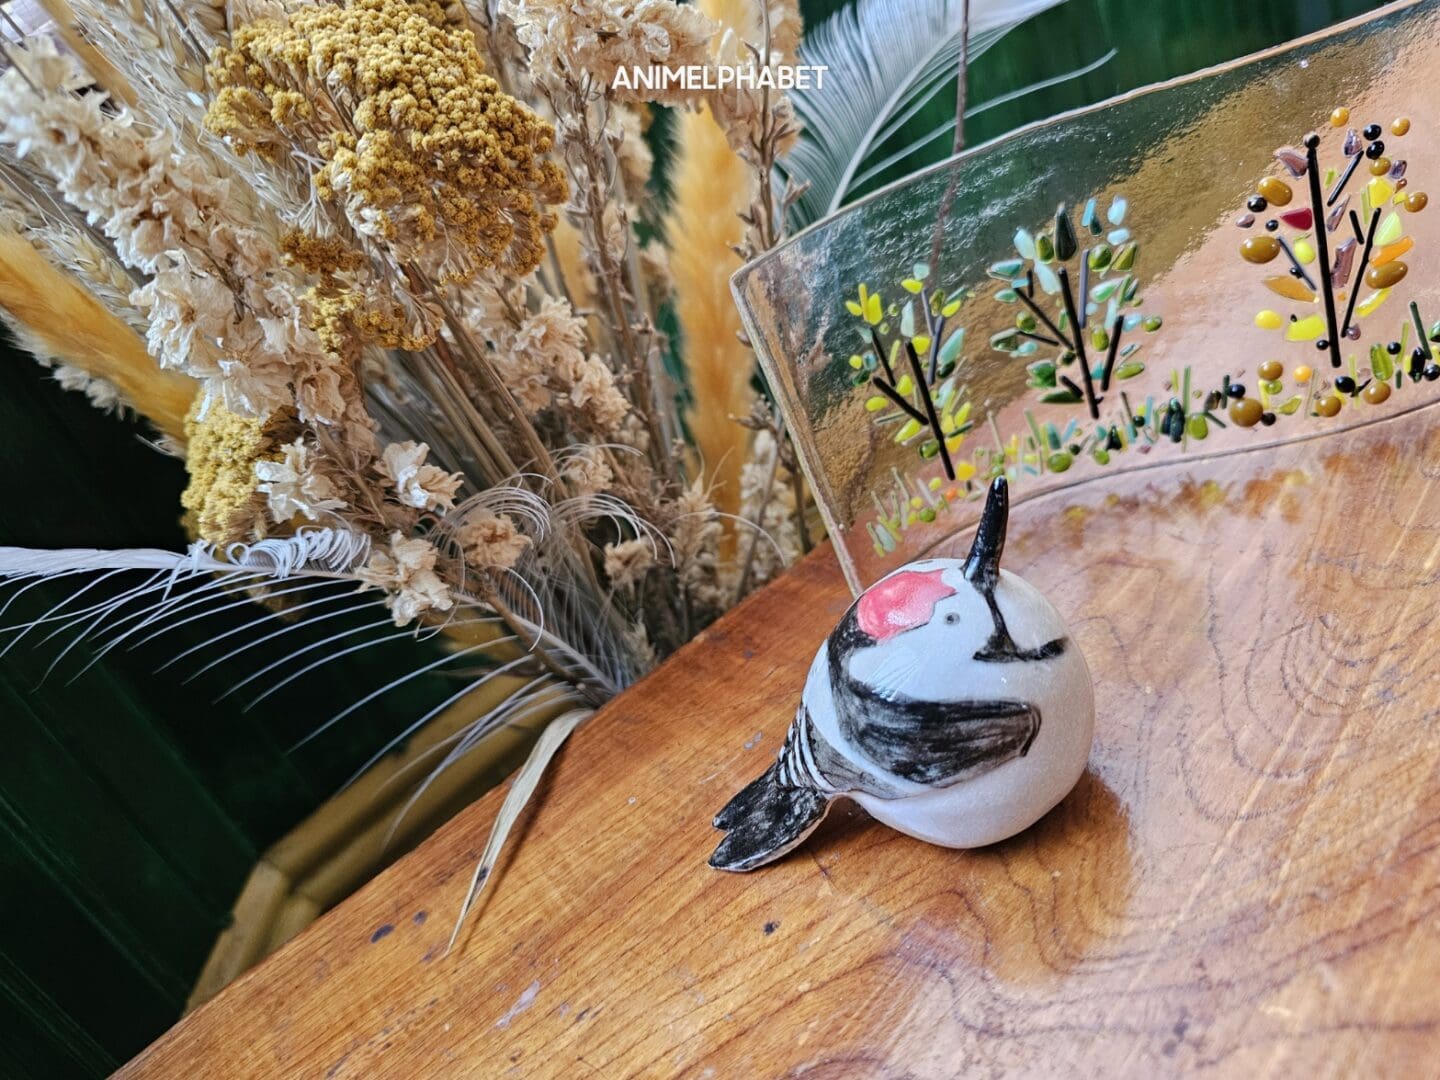 Ceramic lesser spotted woodpecker sat on a wooden table, with dried flowers behind and glass art to the side